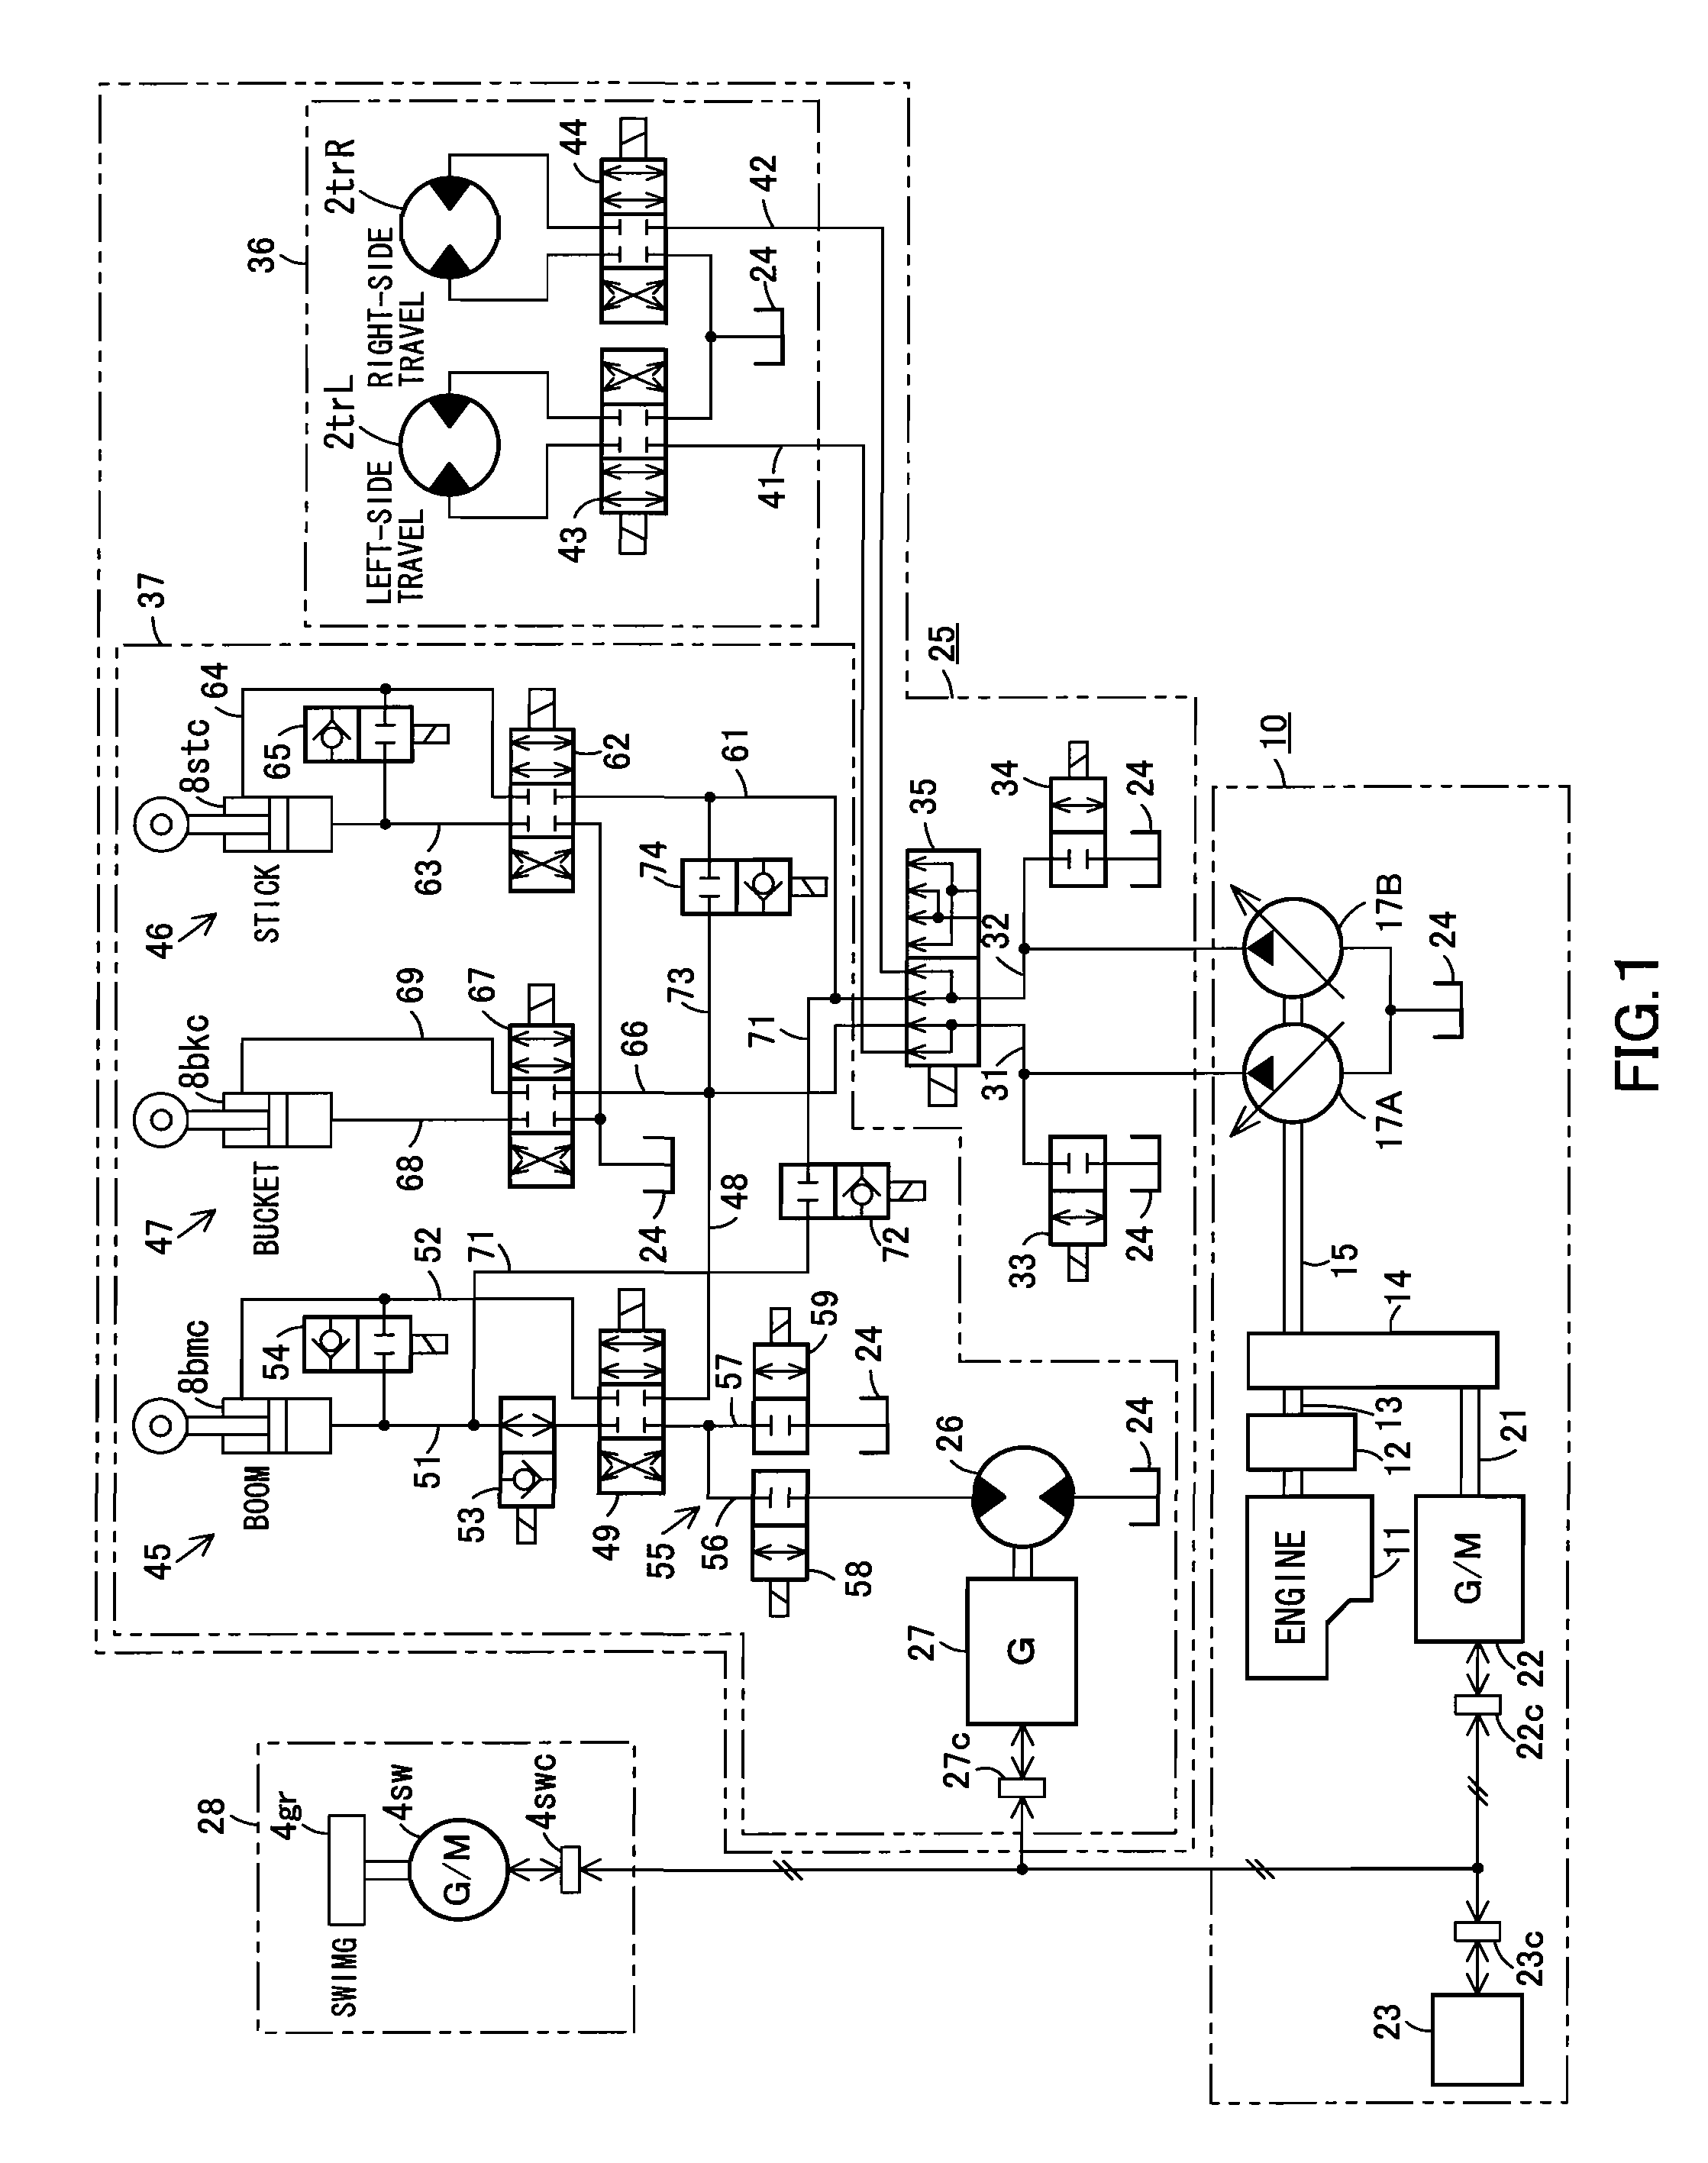 Hydraulic circuit, energy recovery device, and hydraulic circuit for work machine